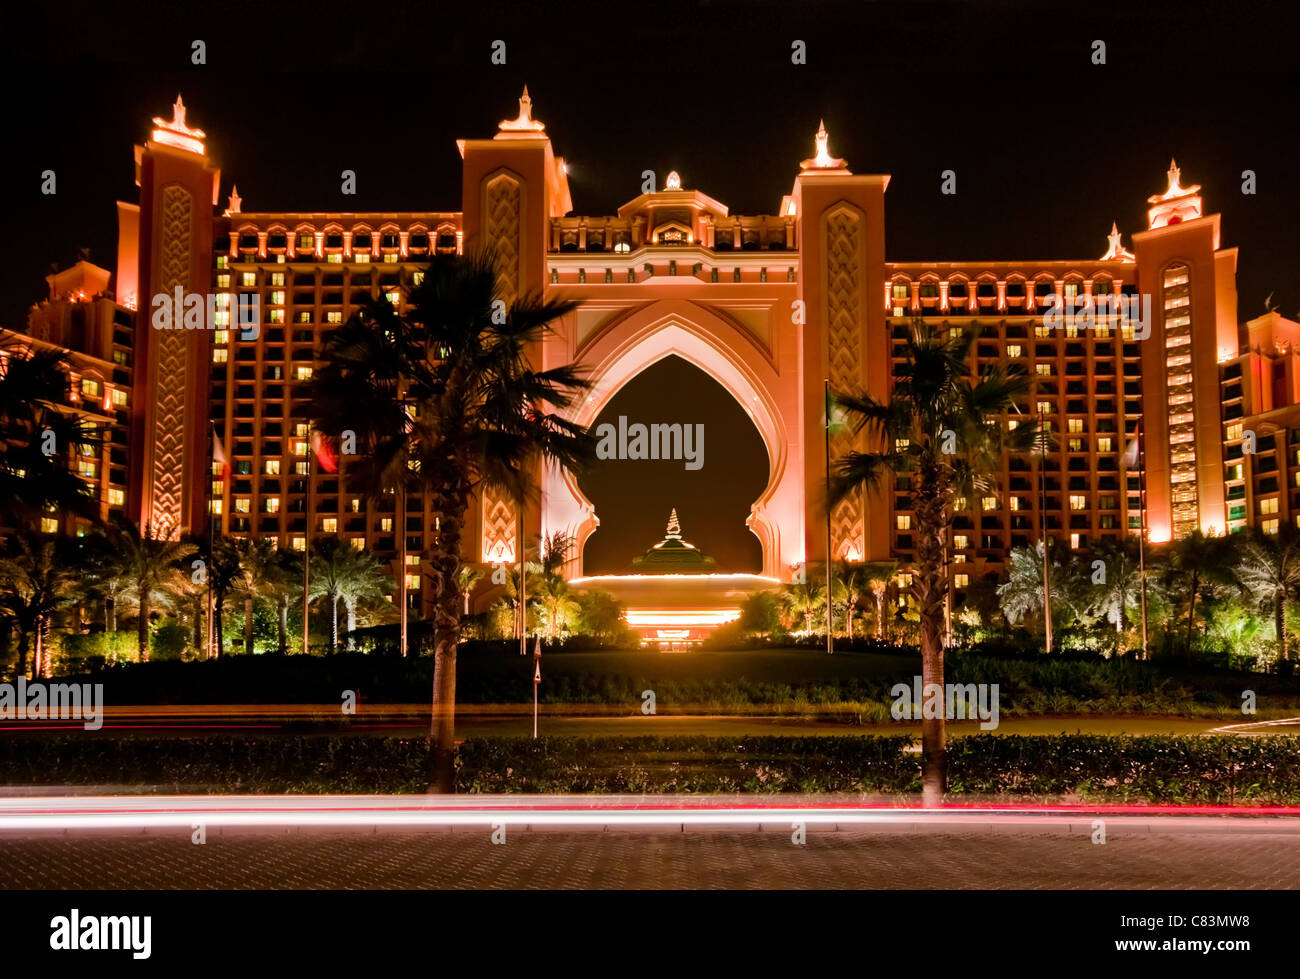 The Atlantis Resort at night, with car light trails in the foreground, Dubai Stock Photo